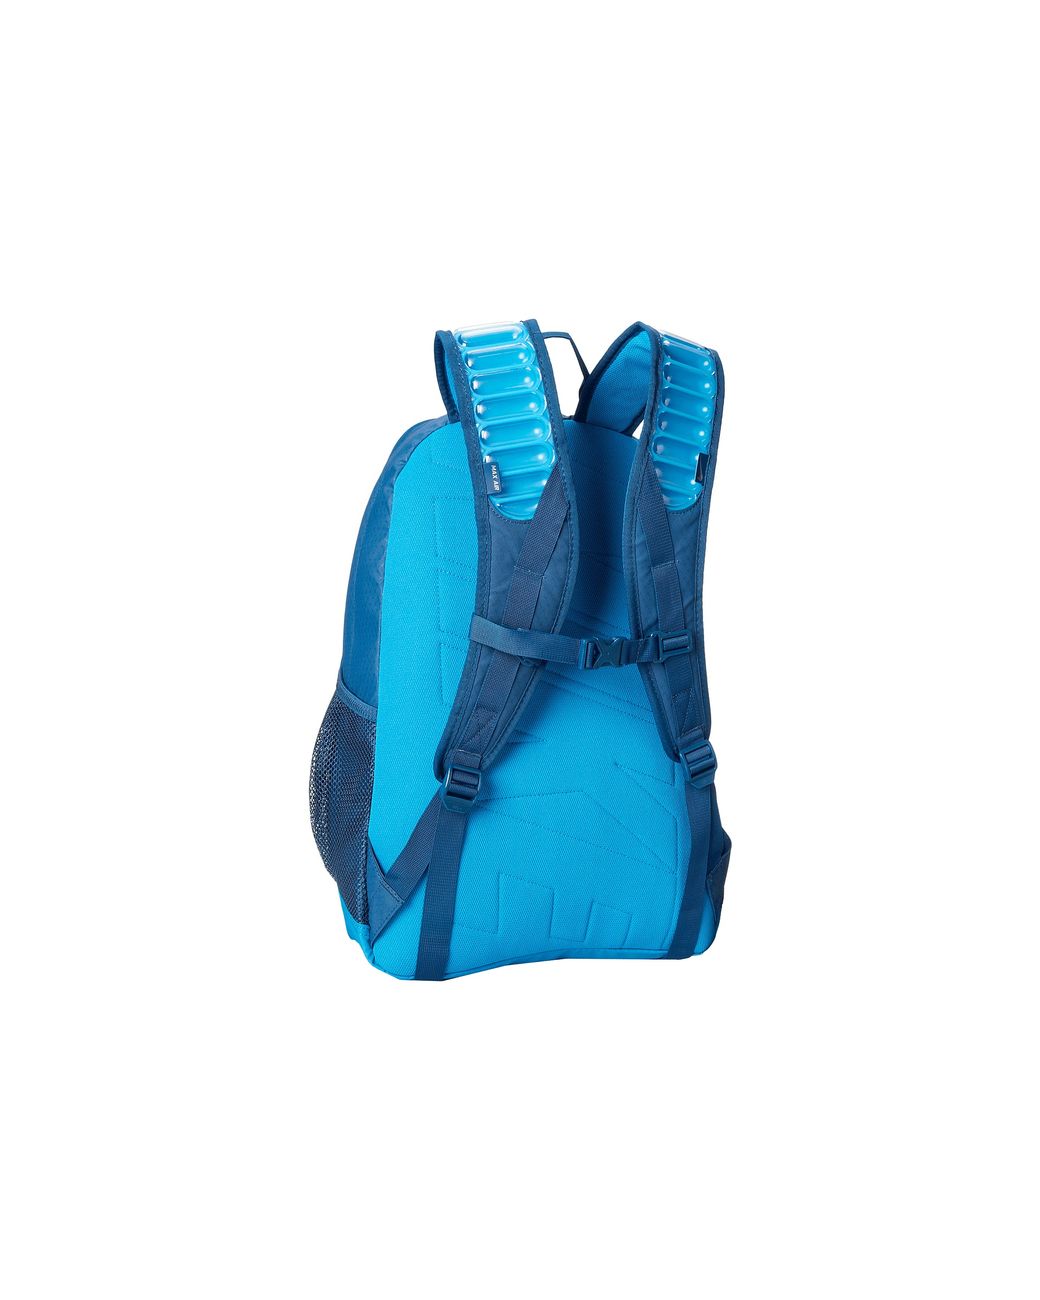 Nike Max Air Vapor Backpack in Blue | Lyst